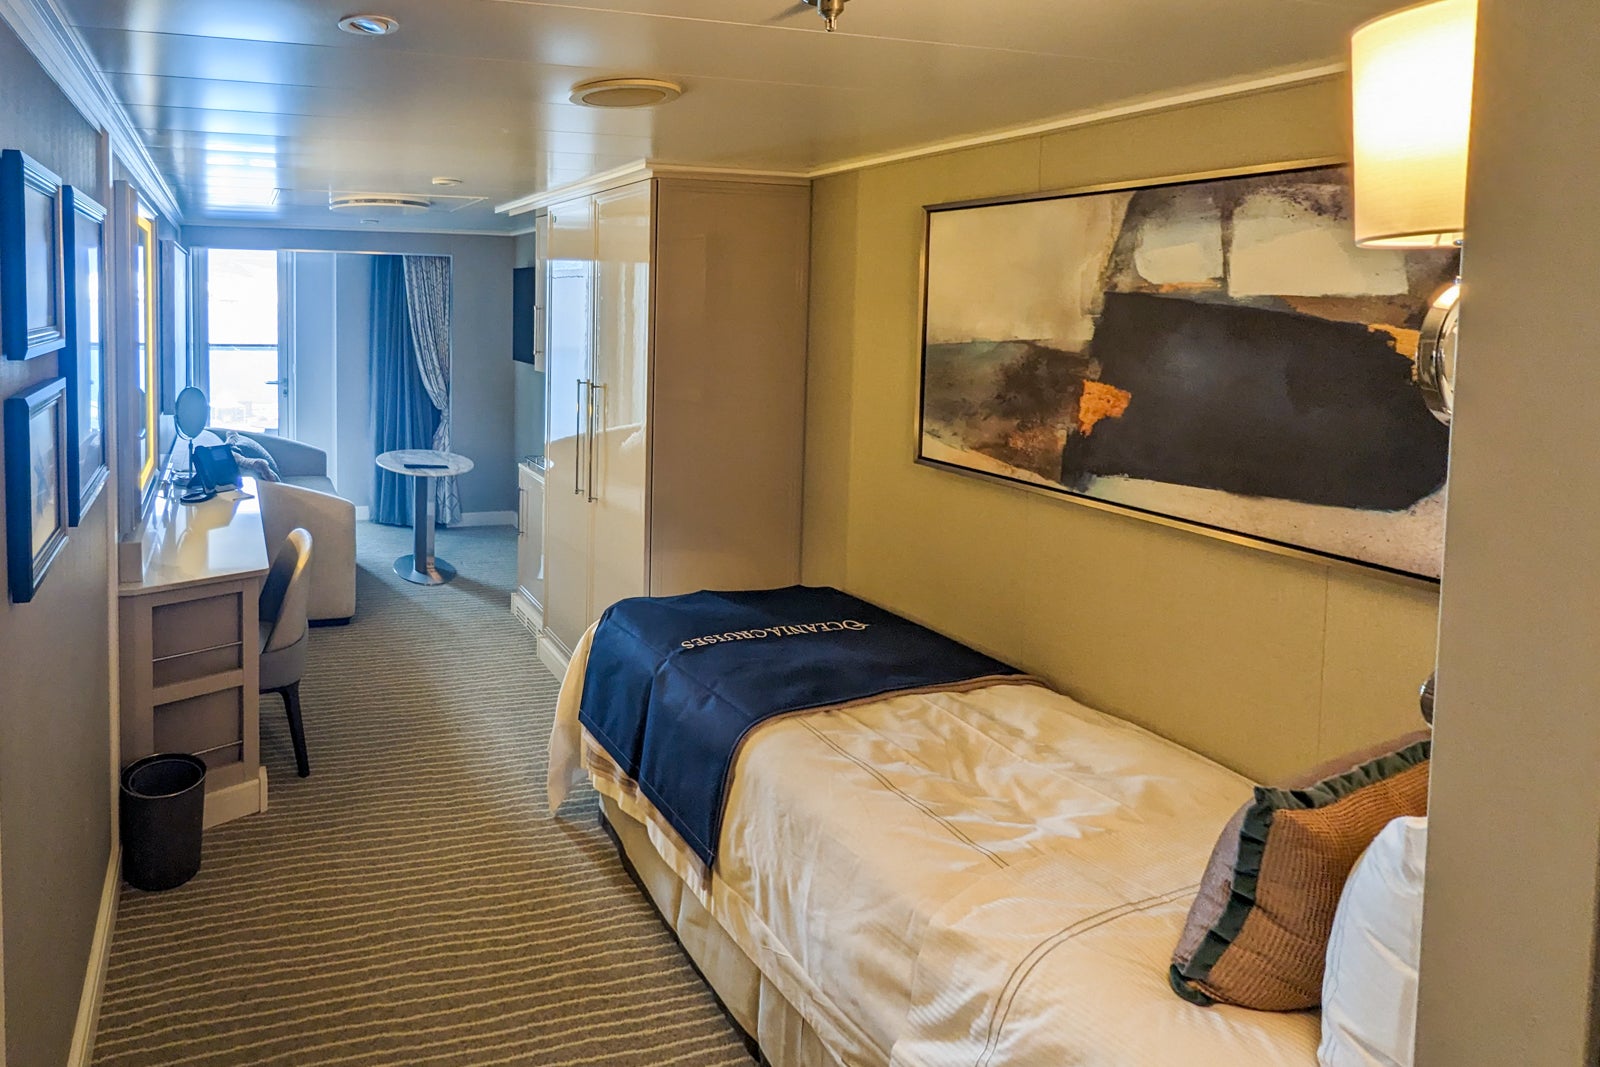 cruise ship room meaning